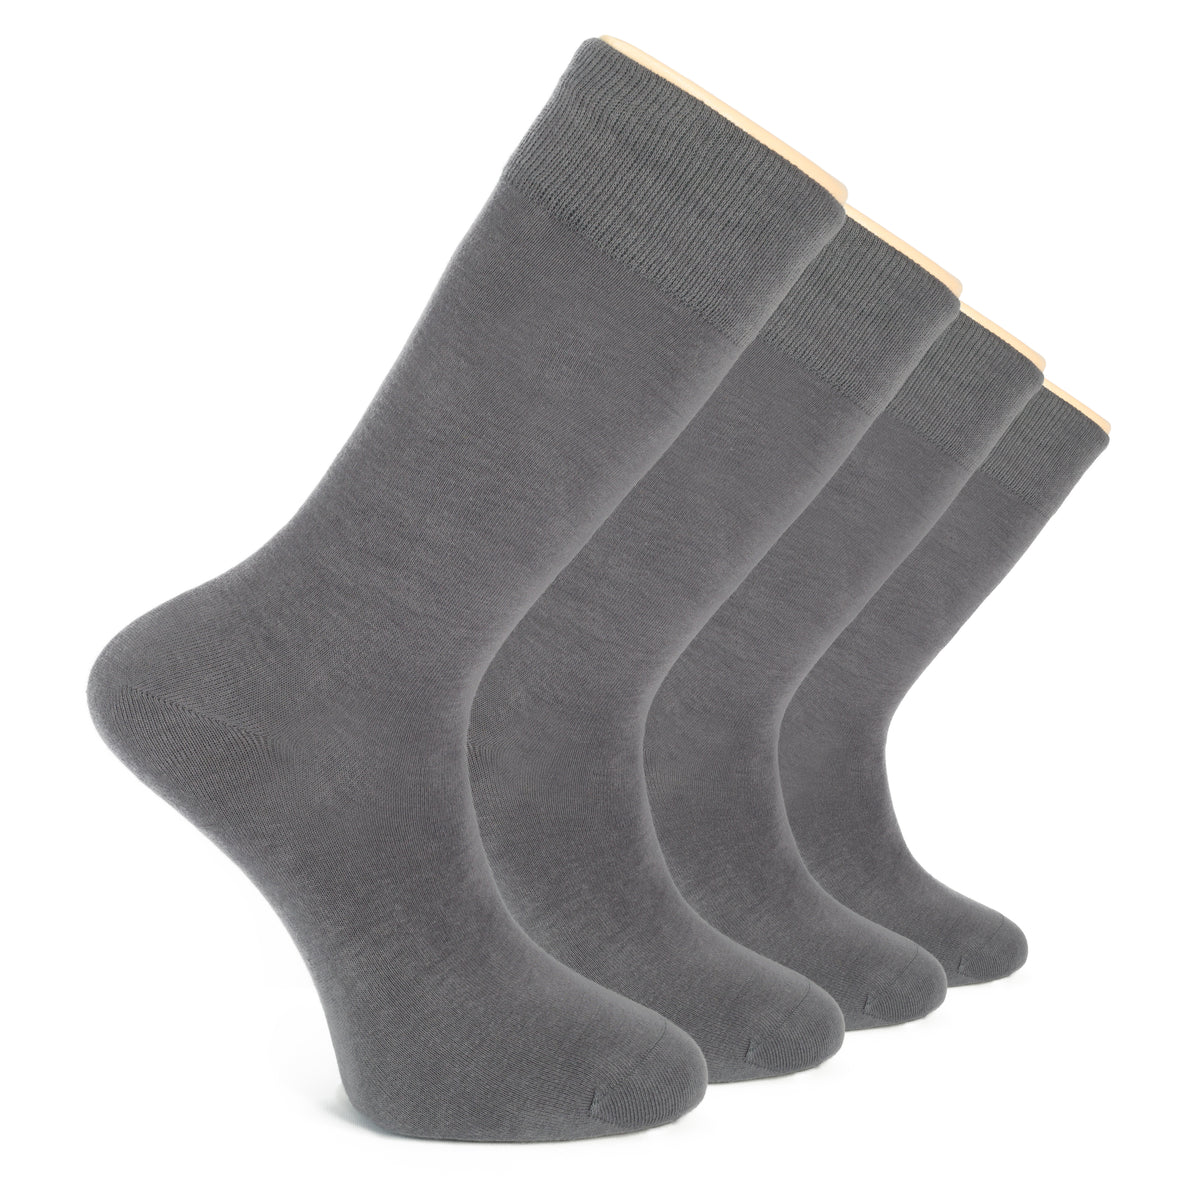 Two pairs of grey cotton crew socks laid out on a pristine white background